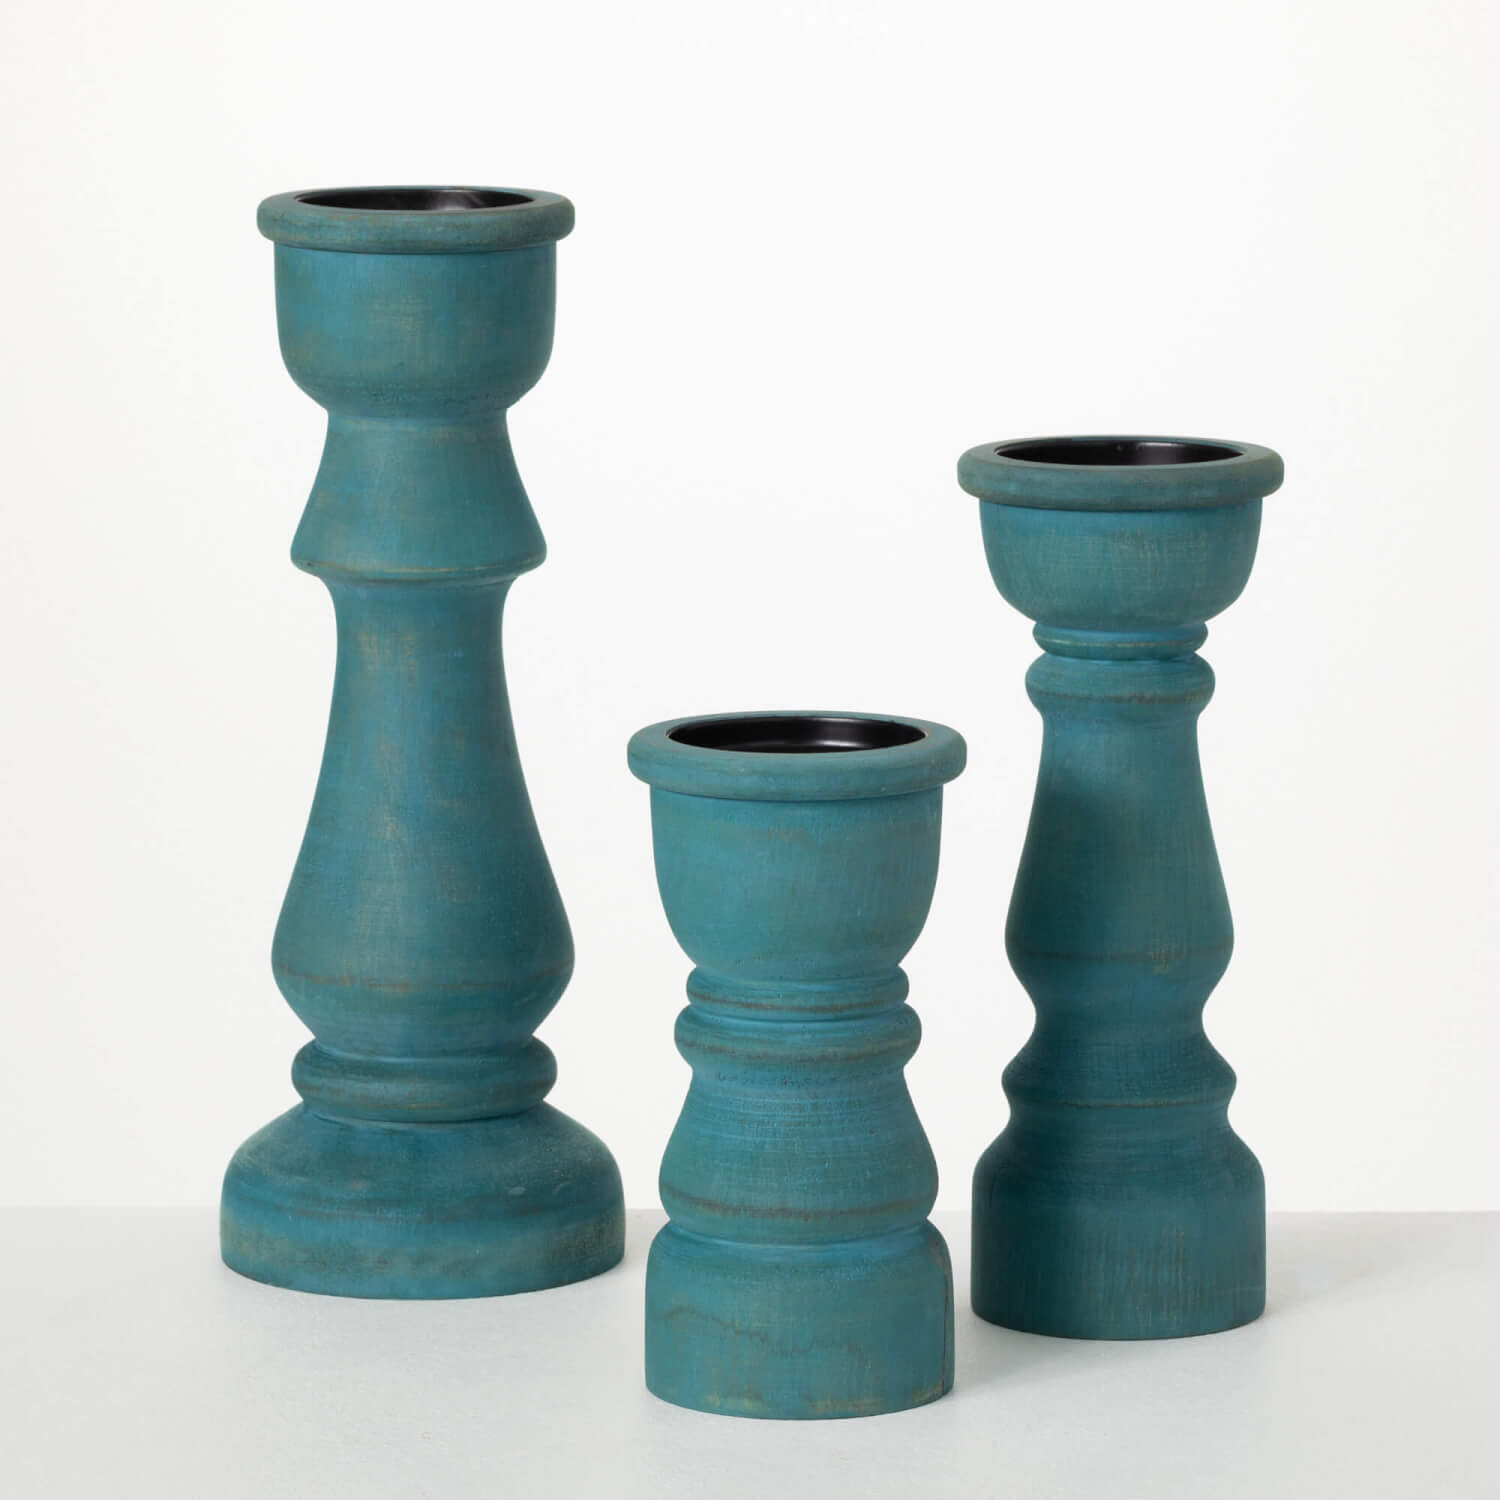 3 sizes of distressed turquoise candle sticks with spindle-style silhouettes and a light grey wash finish.